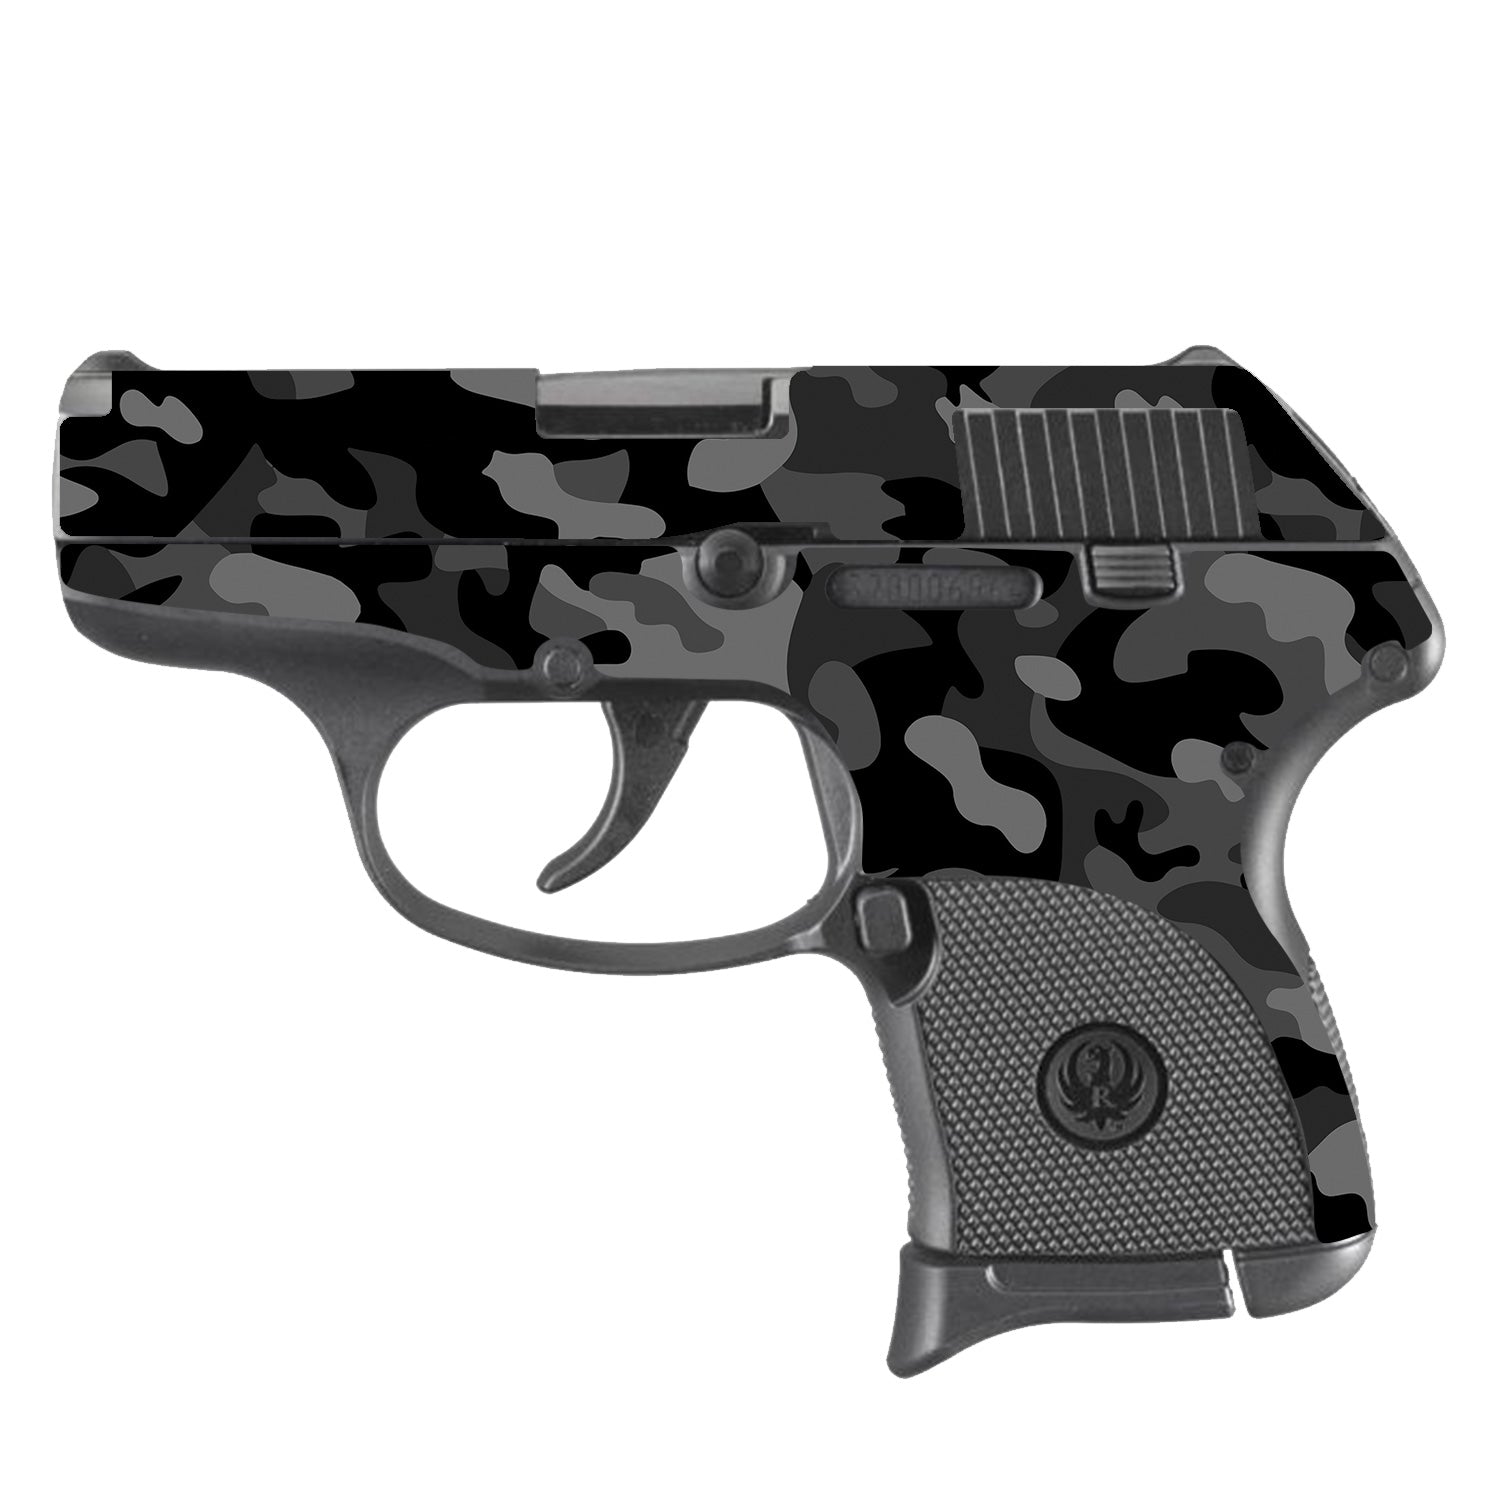 Black Camo Skin For Ruger Lcp 380 Mightyskins